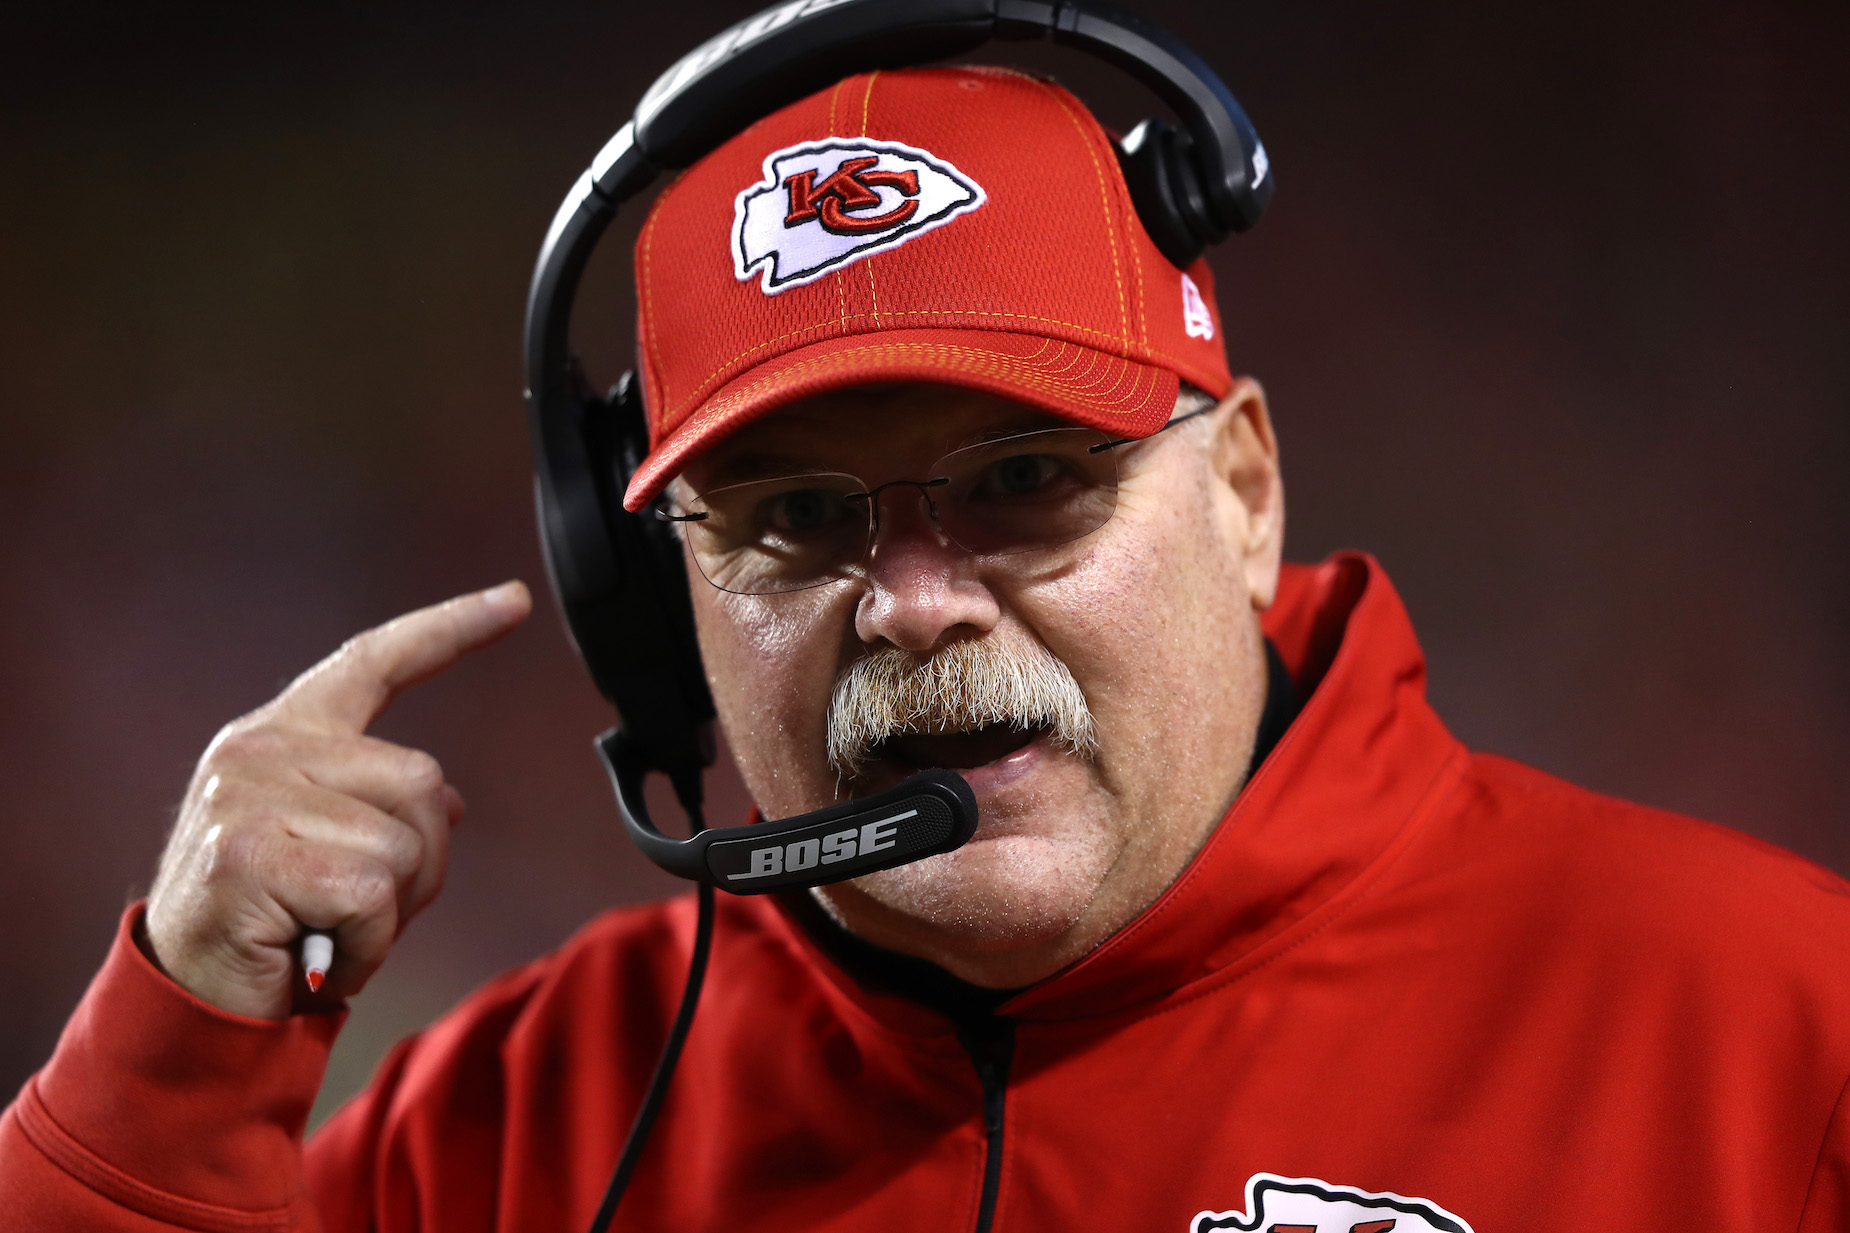 Andy Reid still drives his father's old car that cost $25.